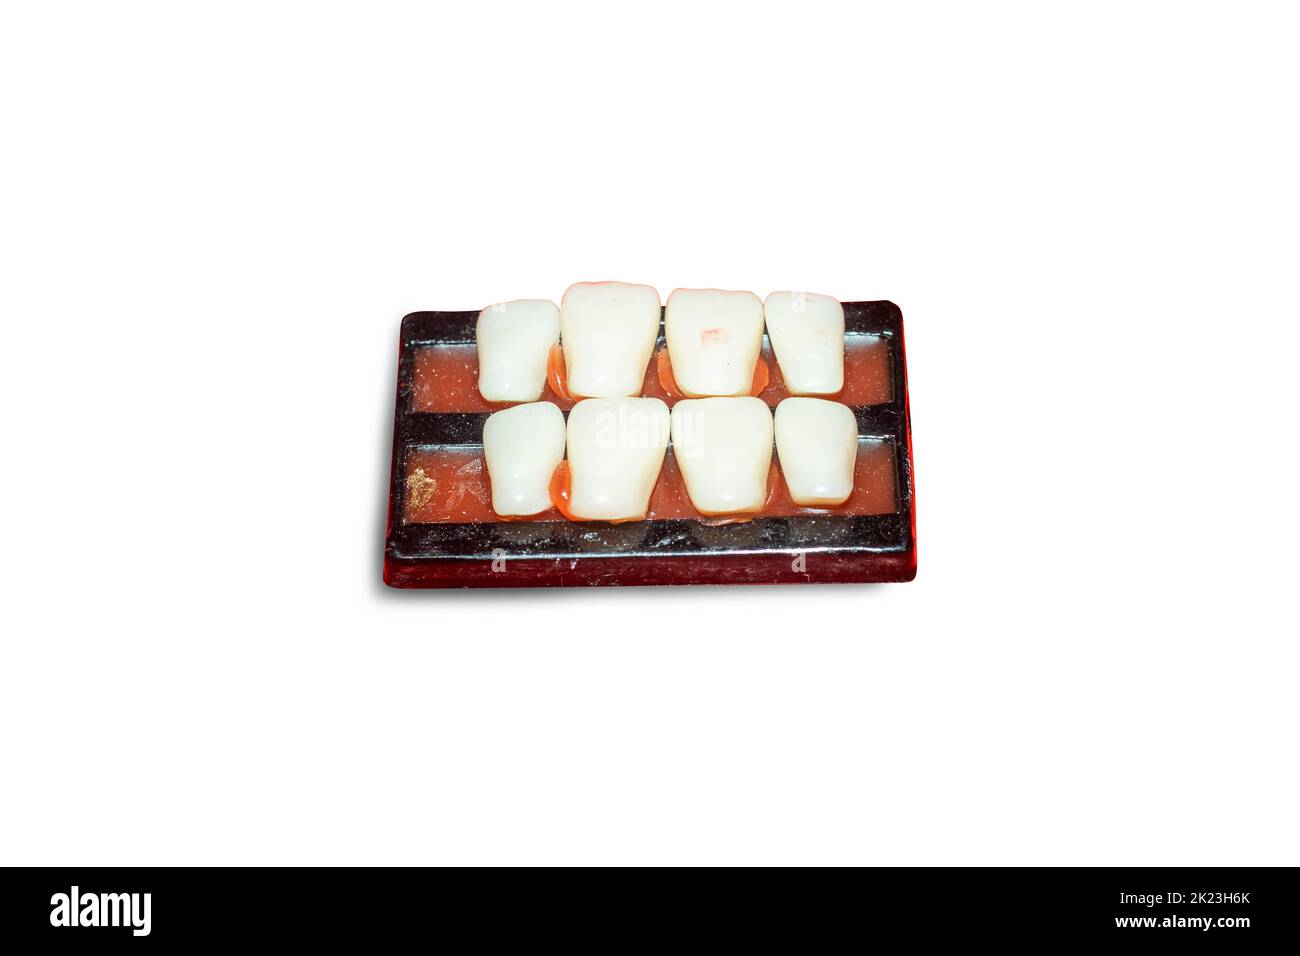 Dental teeth medical anatomy model mental human tooth model. Denture model dentistry cares about fake teeth. Excellent for demonstrating dental on whi Stock Photo